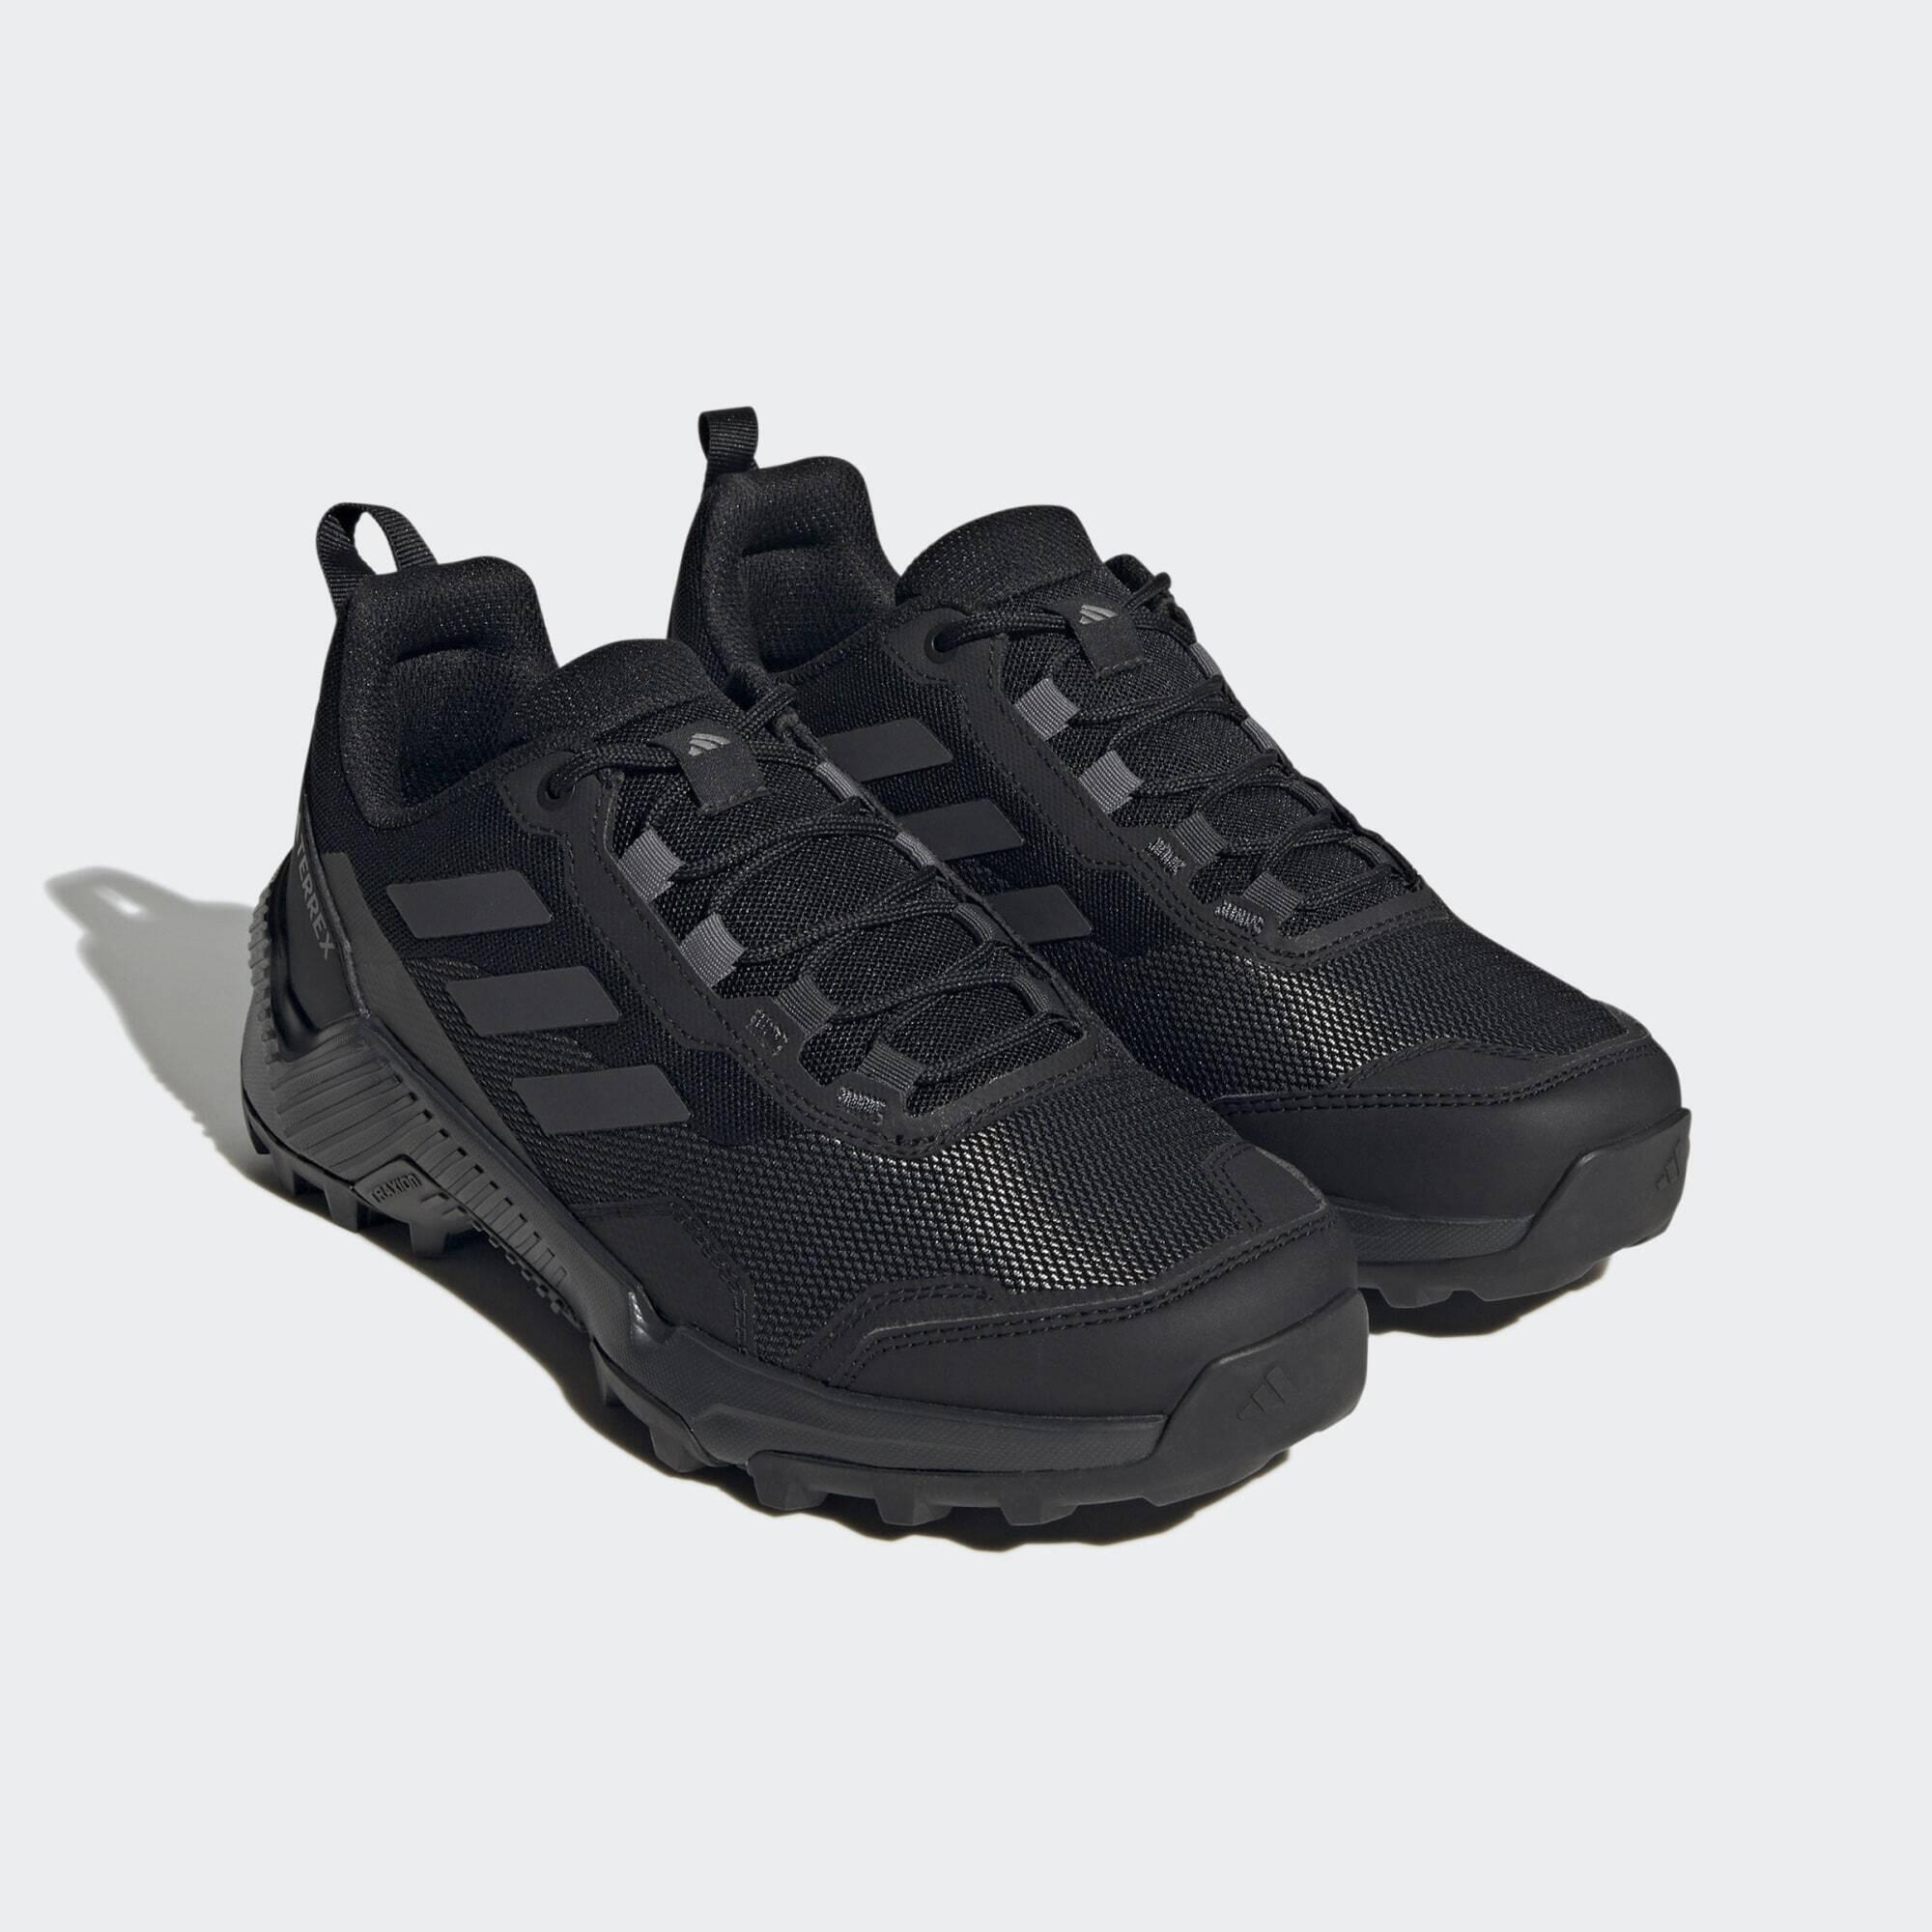 Eastrail 2.0 Hiking Shoes 5/7